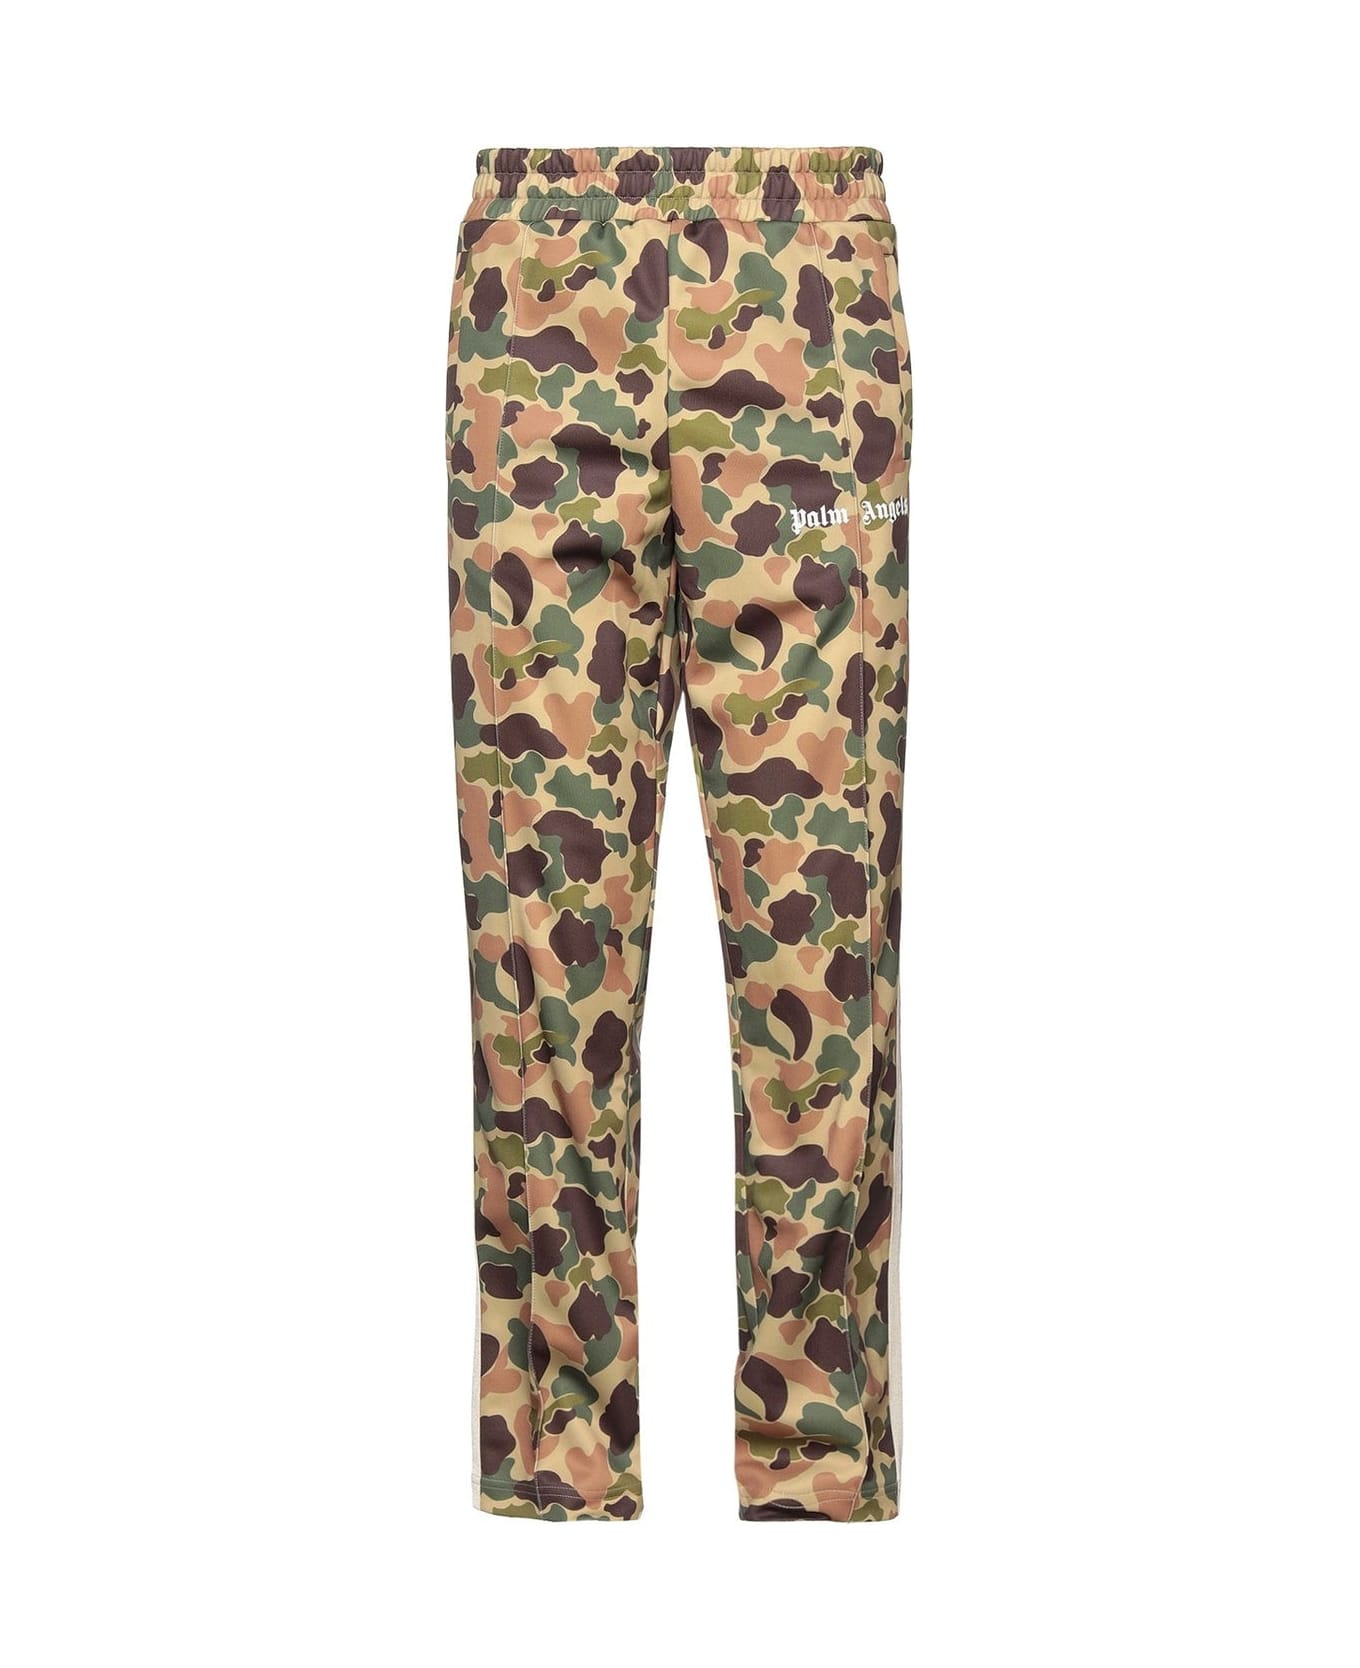 Palm Angels Camouflage Sweatpants - Brown